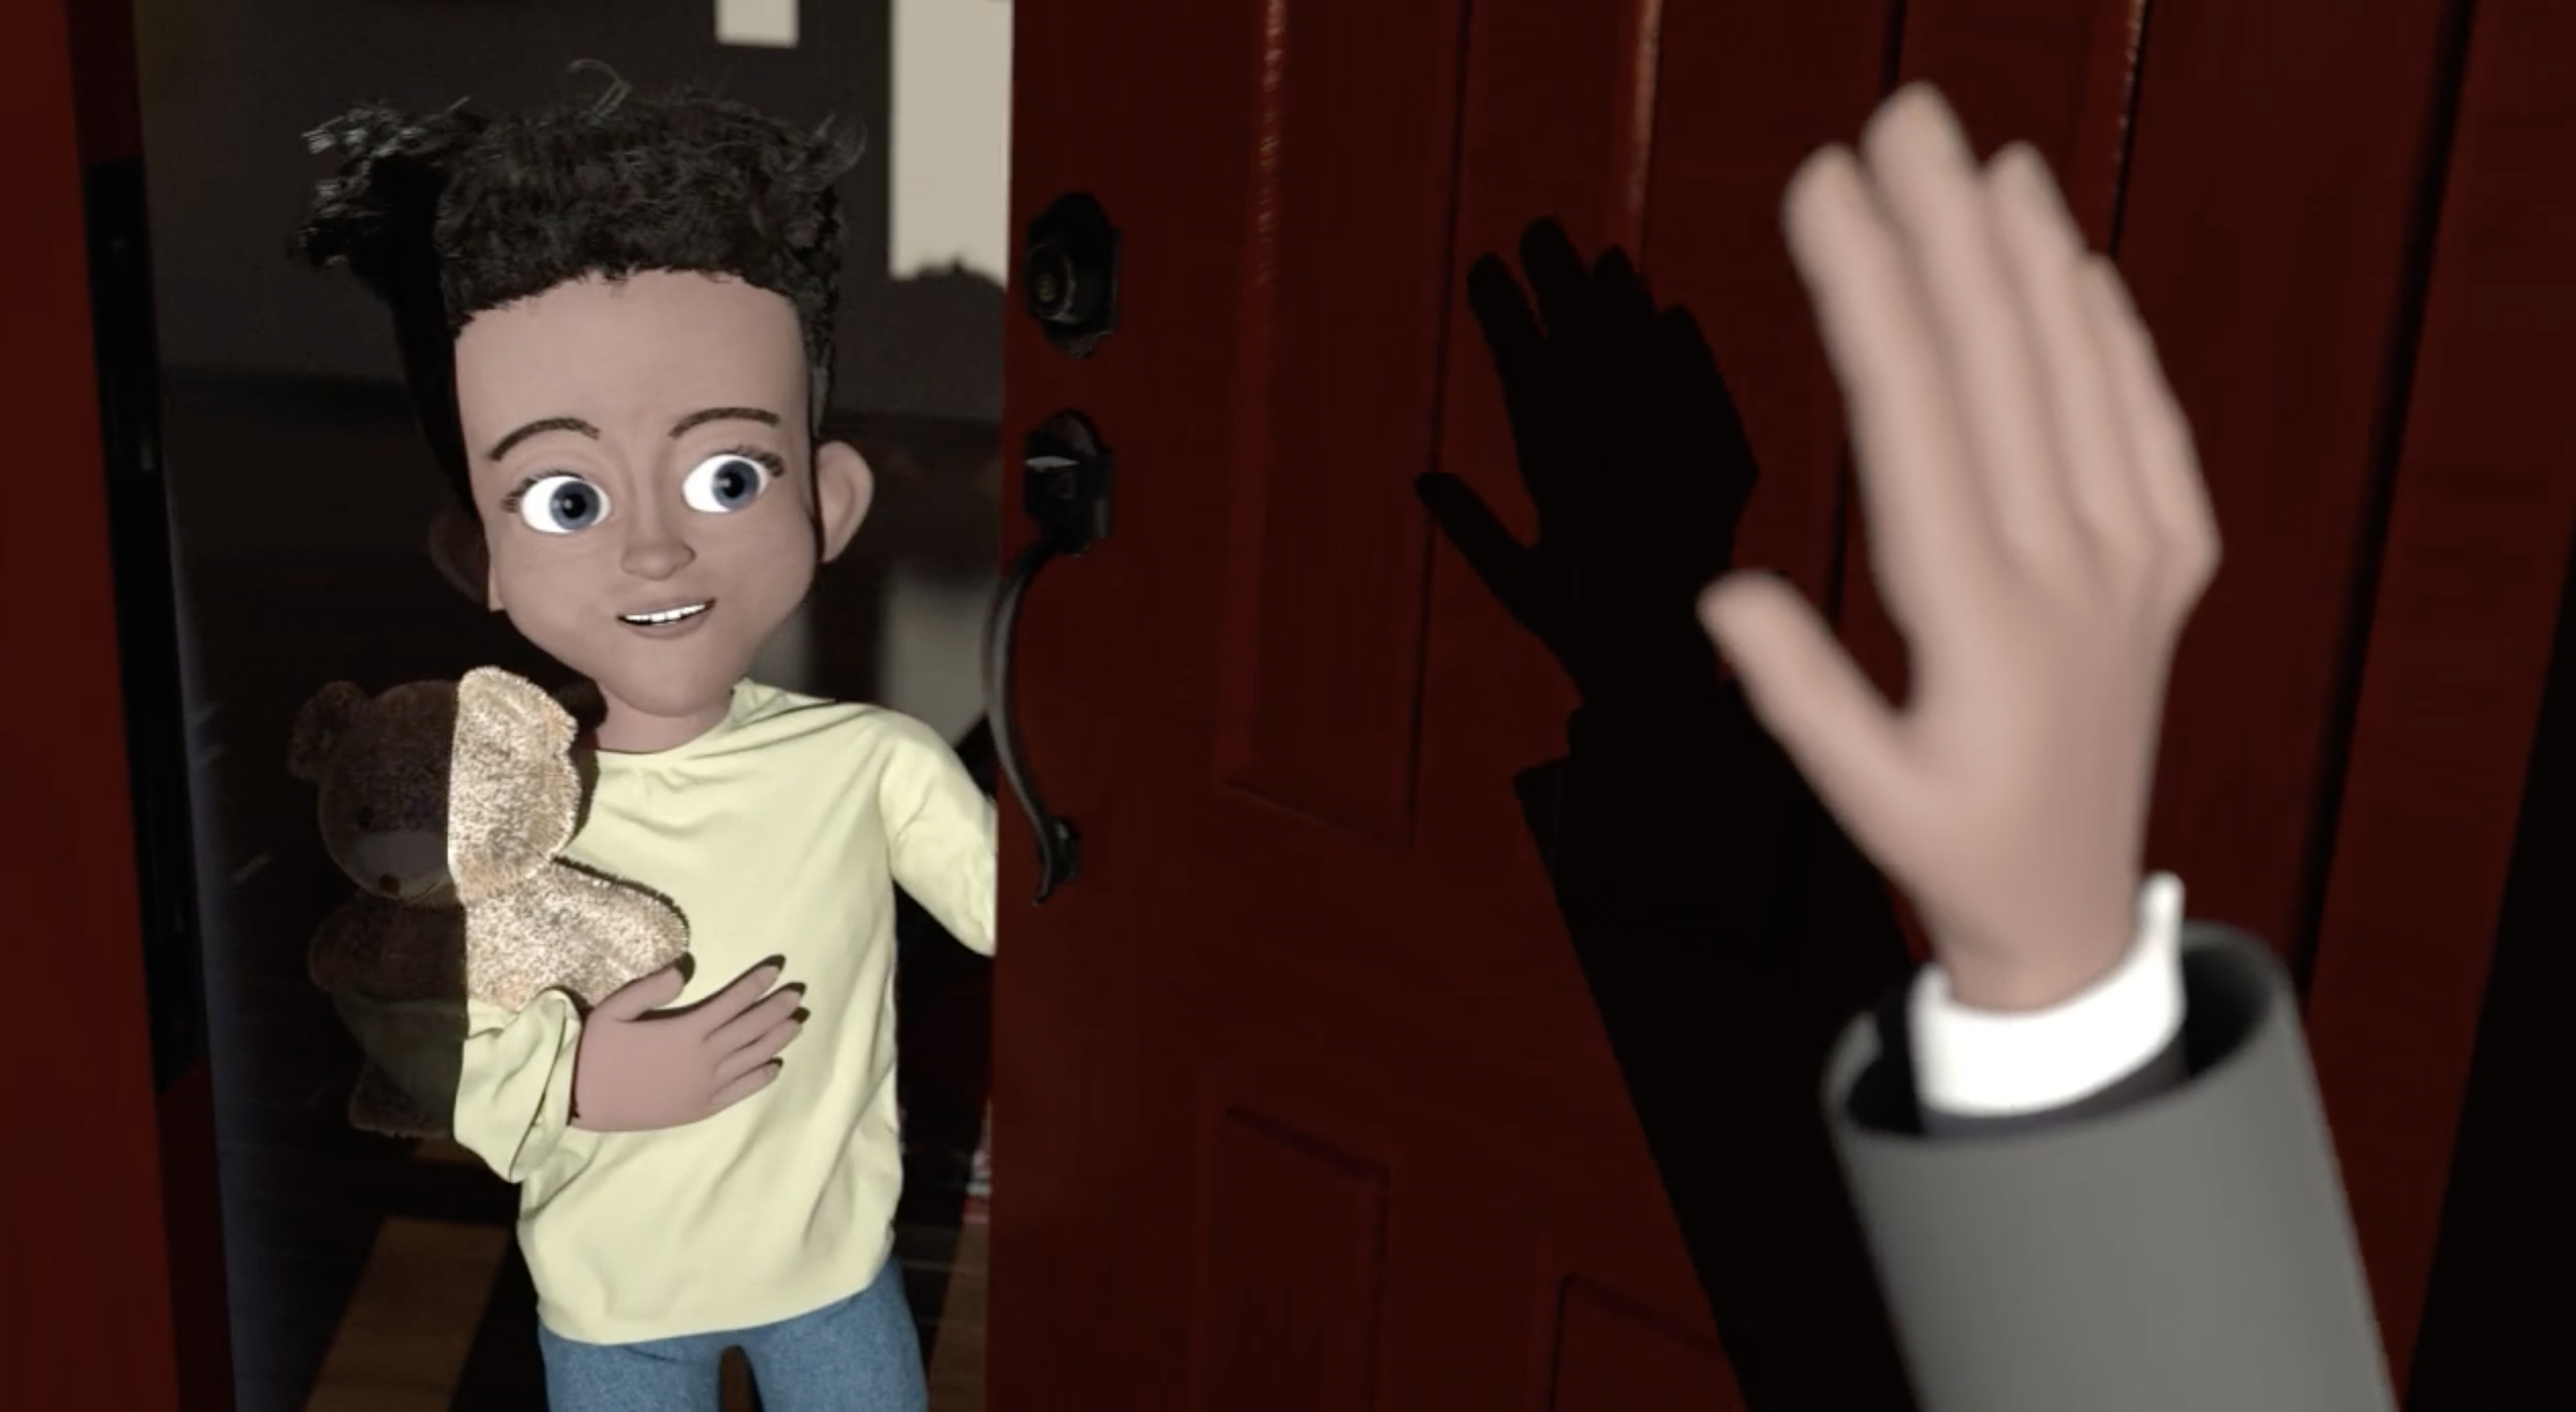 A little boy holding a teddy bear stands in a doorway looking up at someone's hand waving in a greeting